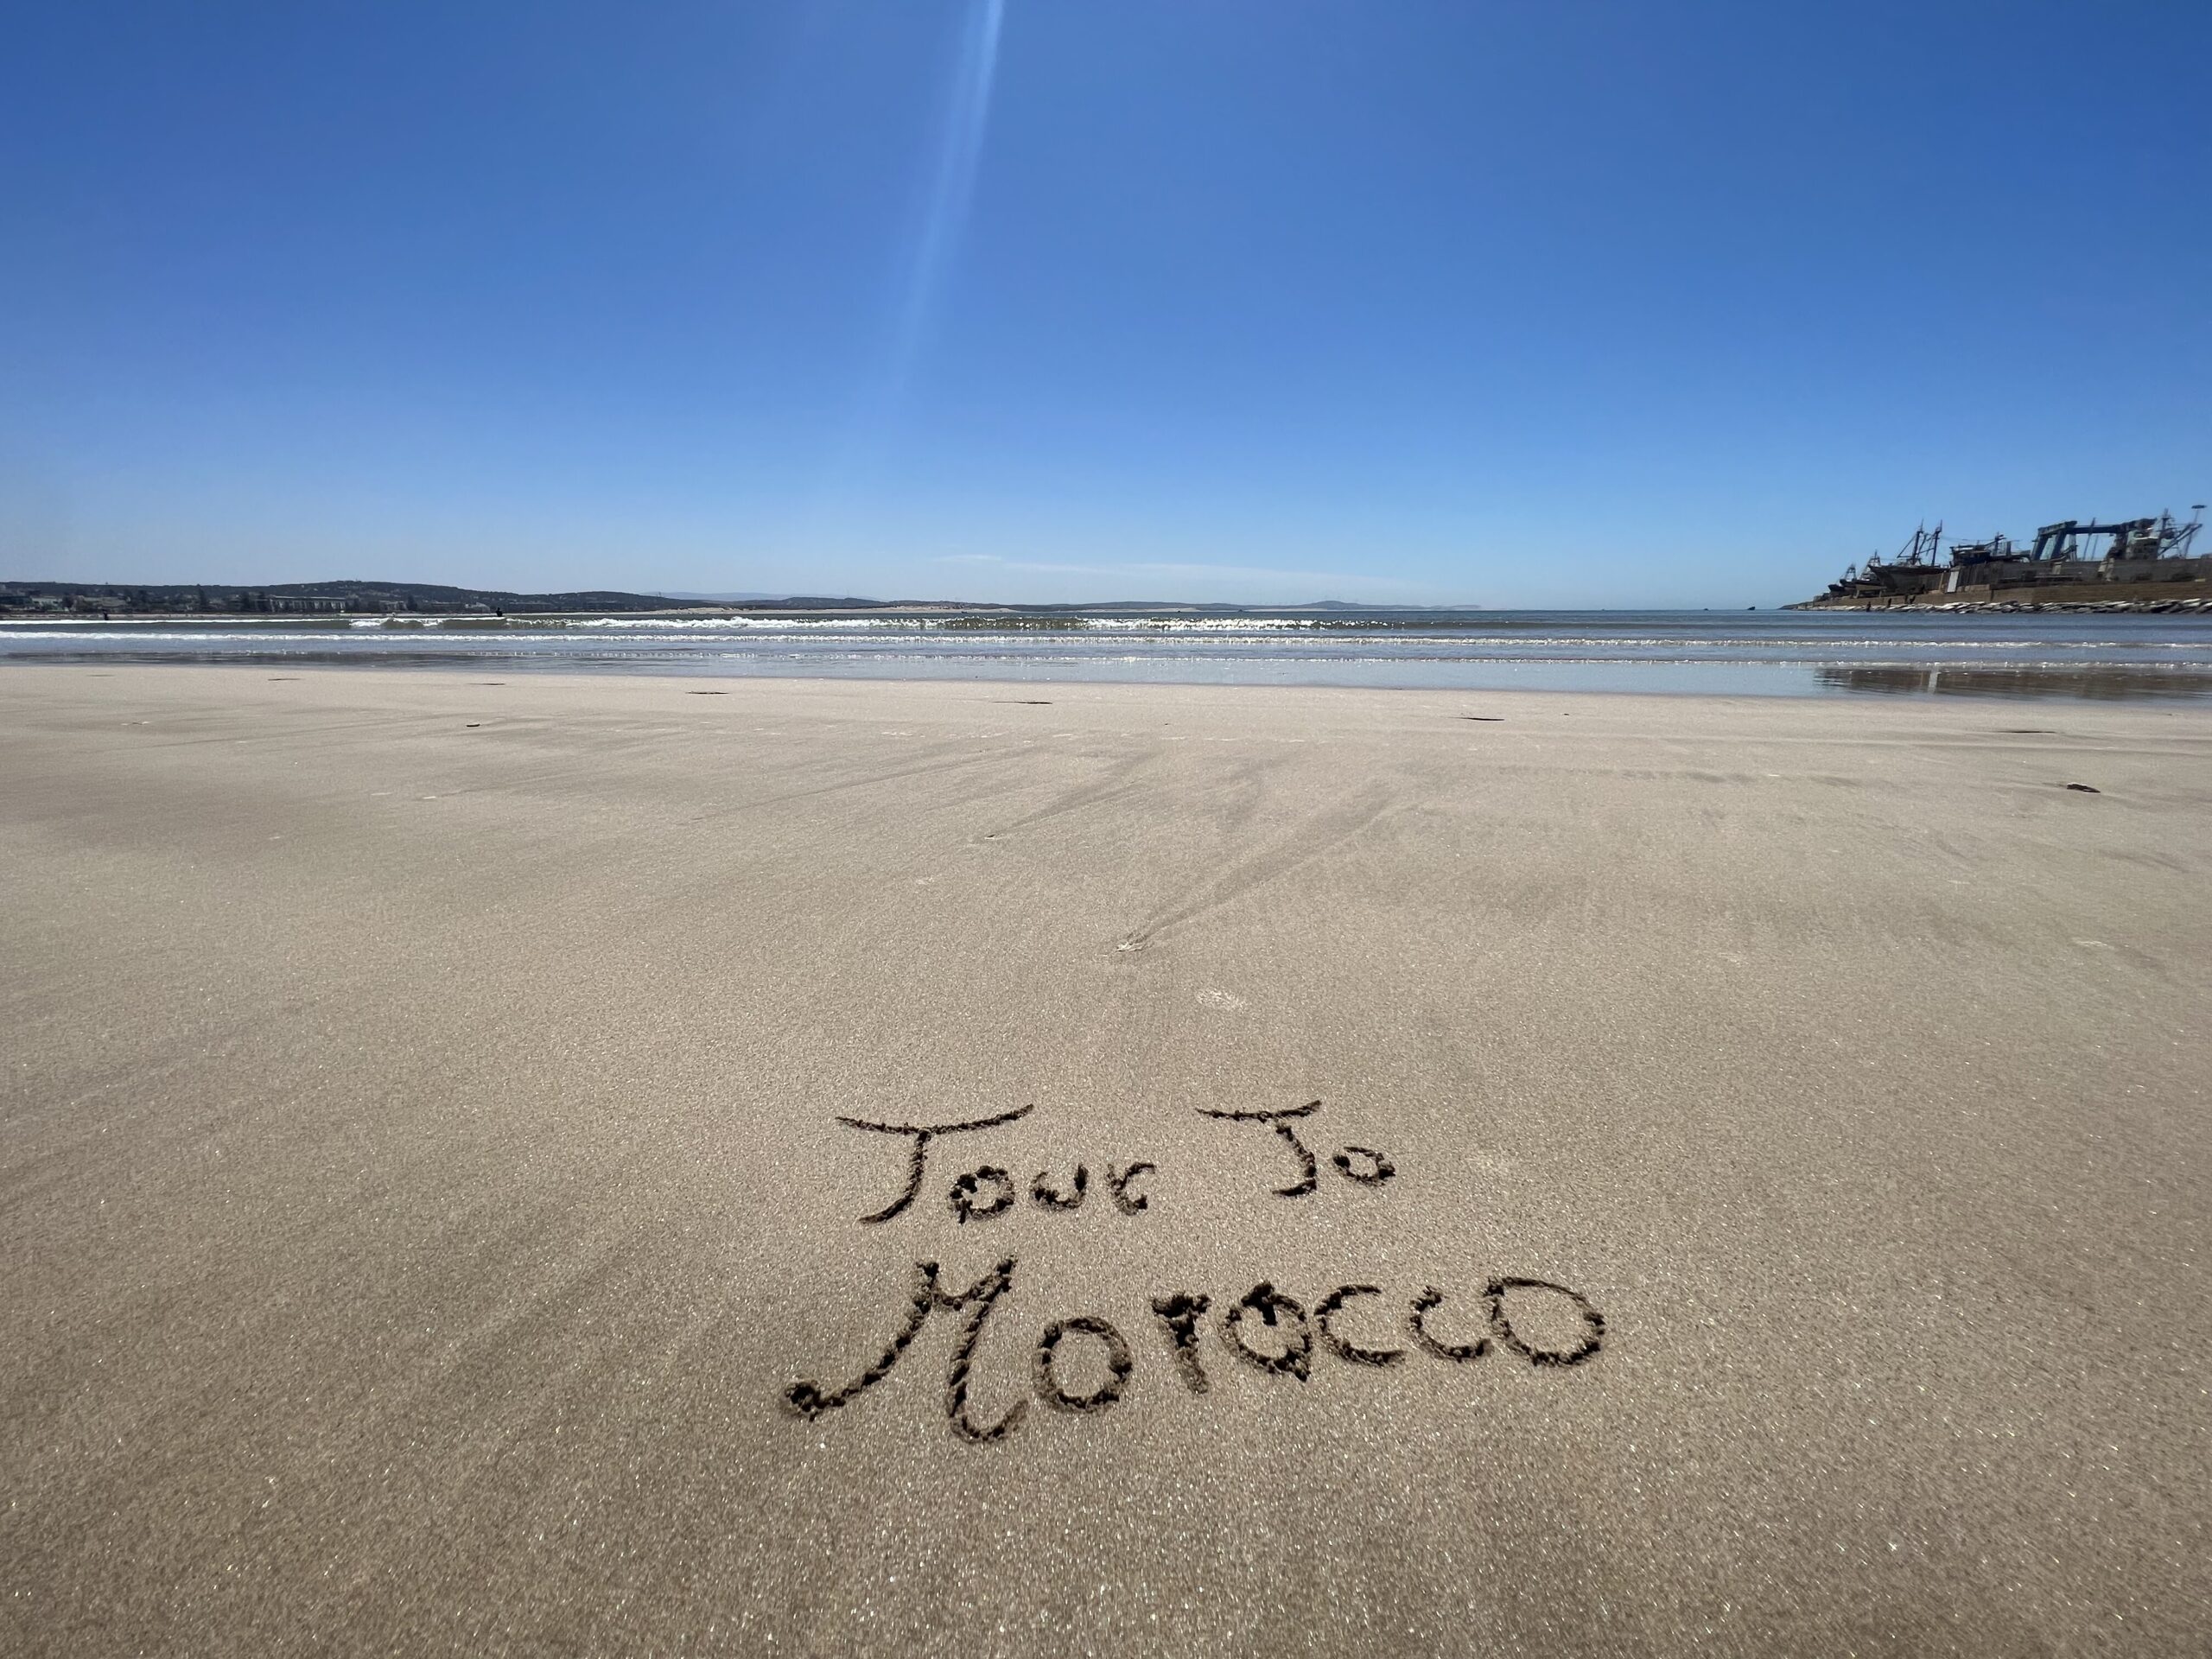 What to do in two weeks in Morocco?